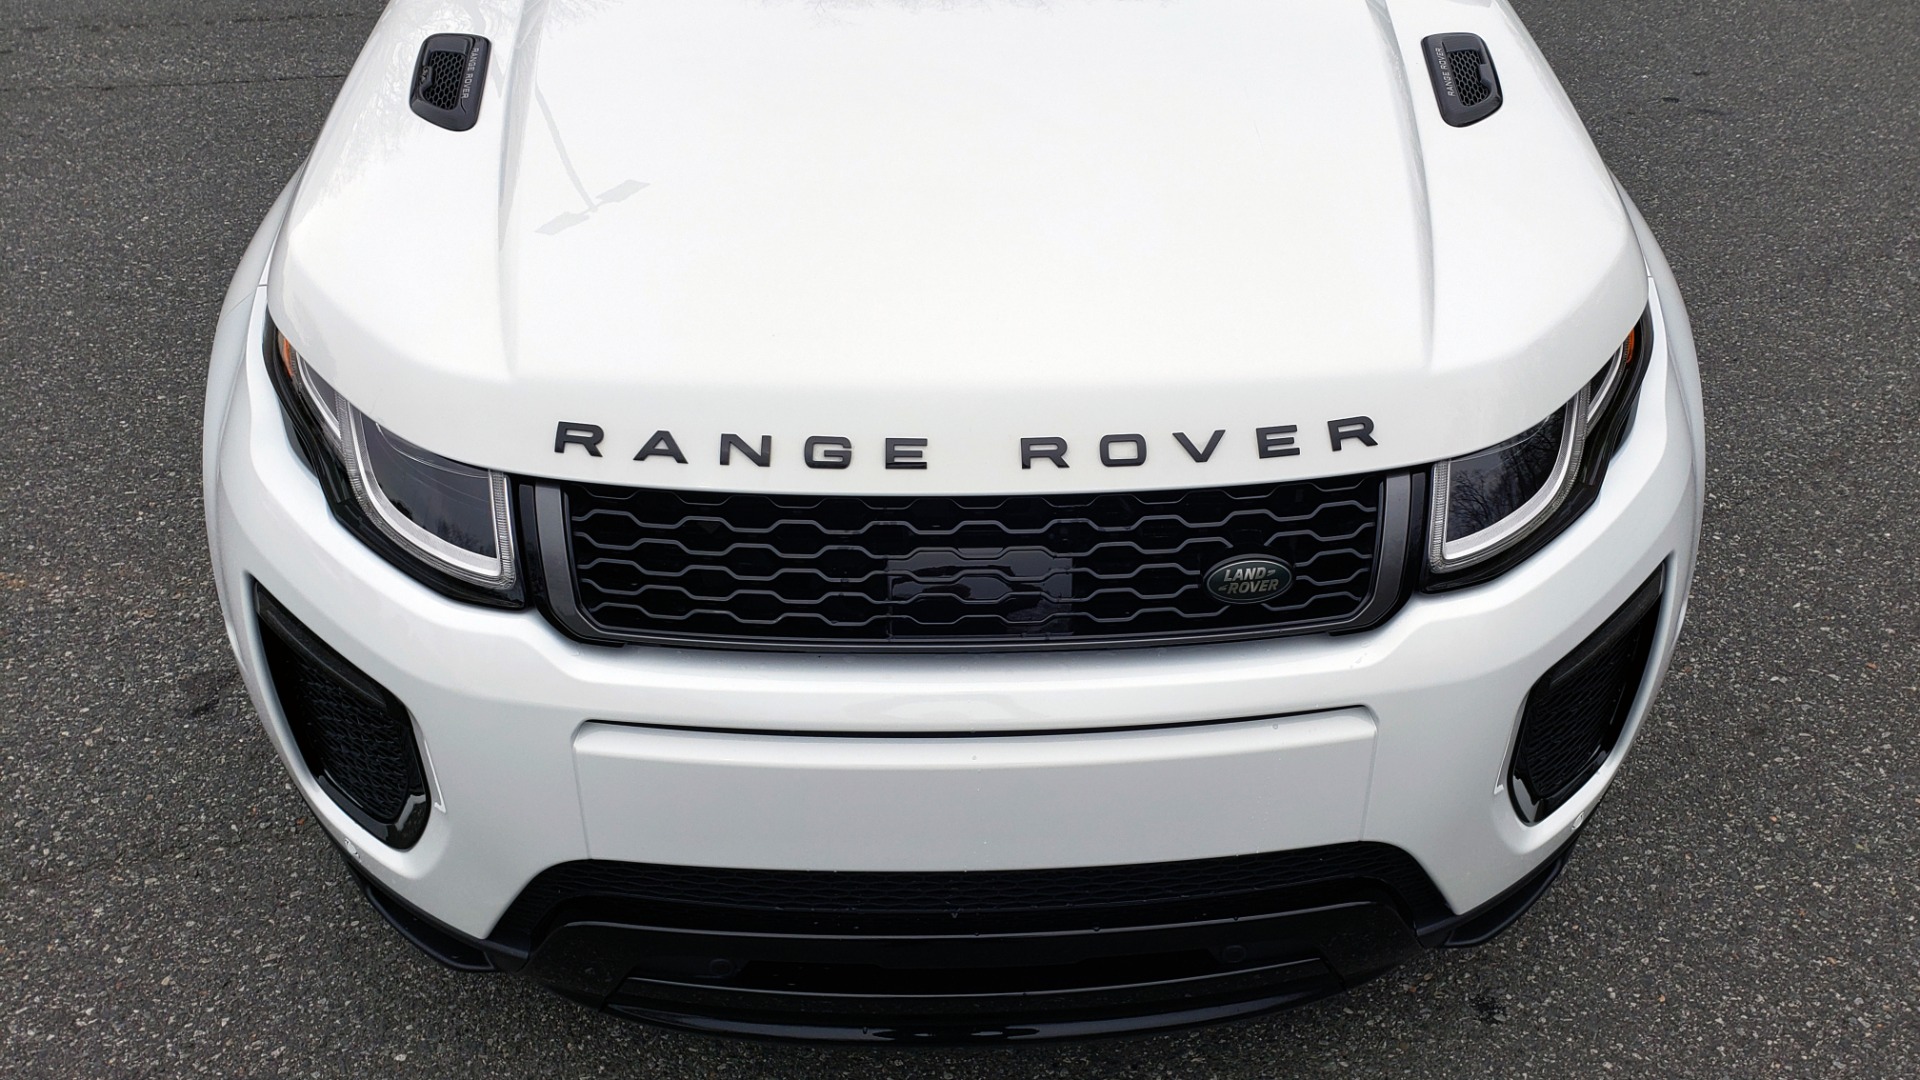 Used 2016 Land Rover RANGE ROVER EVOQUE HSE DYNAMIC / AWD / NAV / PANO-ROOF / REARVIEW / 22-IN WHEELS for sale Sold at Formula Imports in Charlotte NC 28227 17